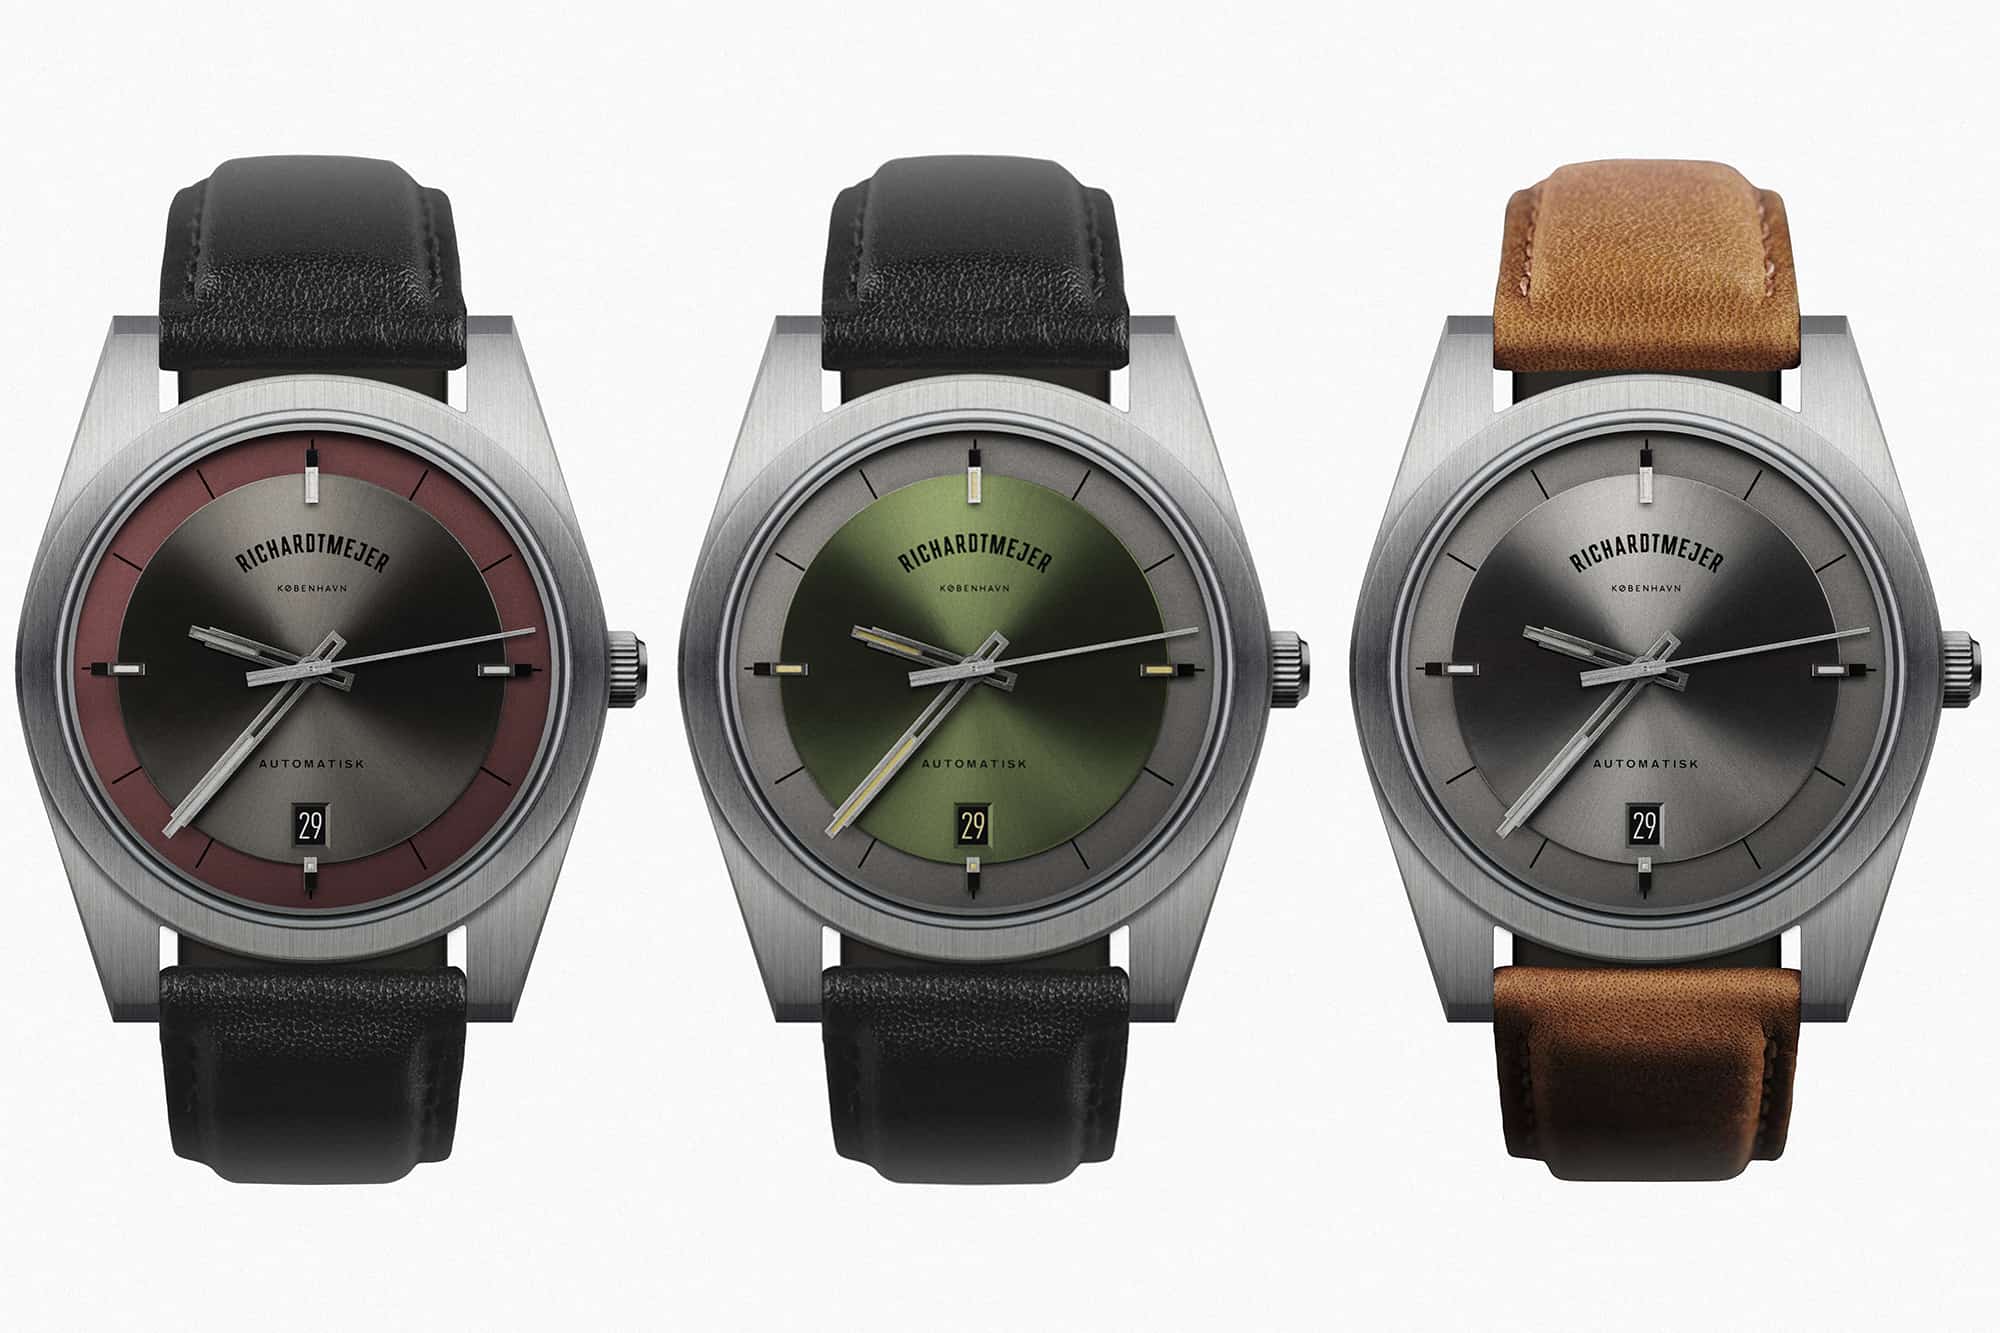 Introducing the Richardt & Mejer Automatisk Collection